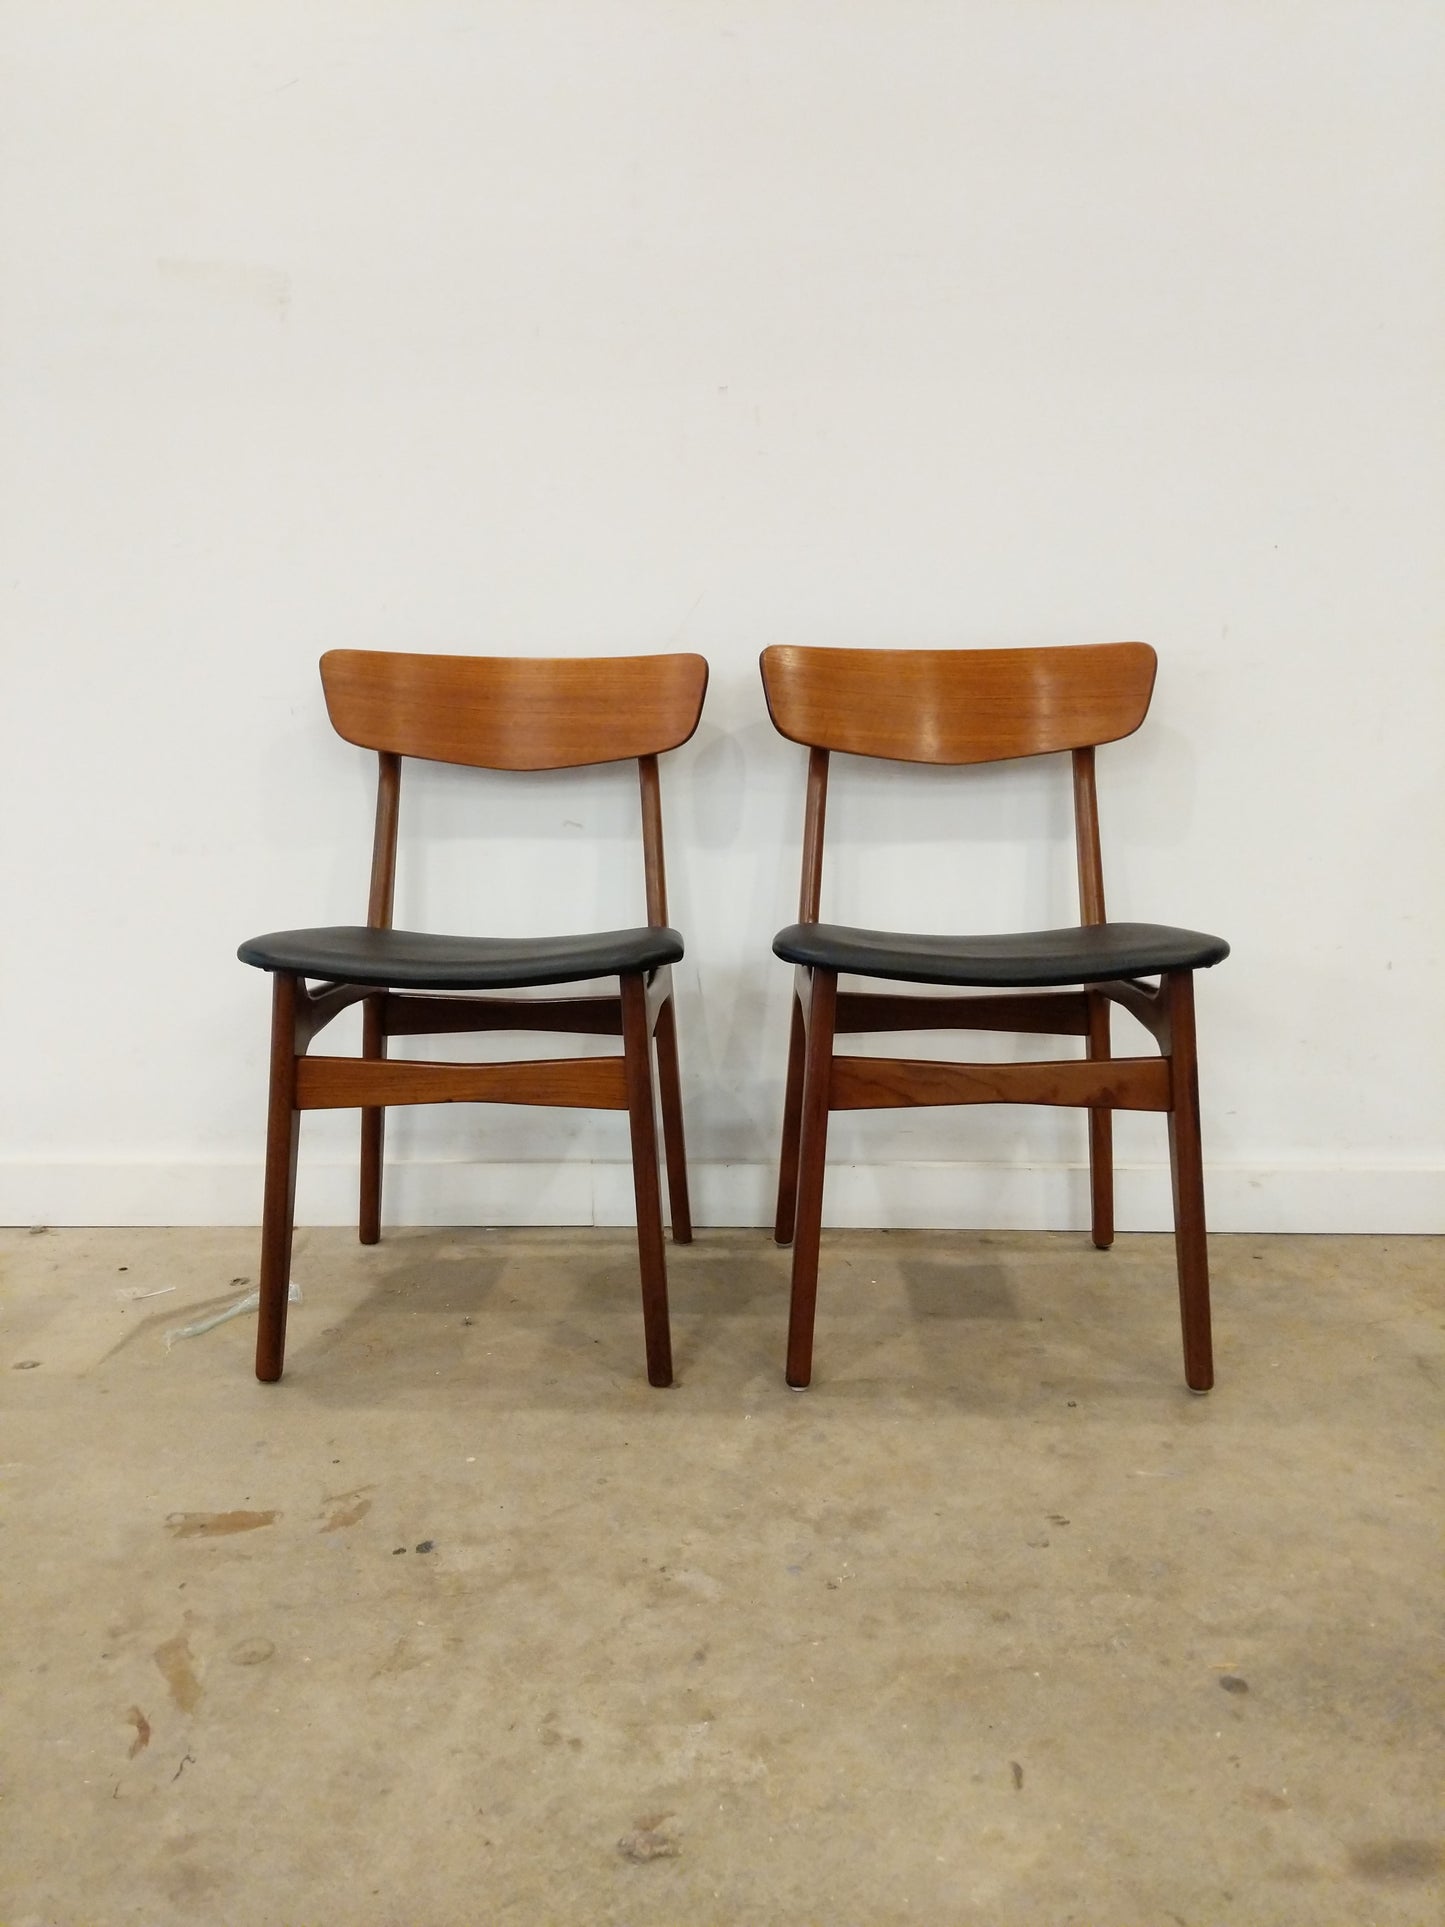 Pair of Vintage Danish Modern Dining Chairs